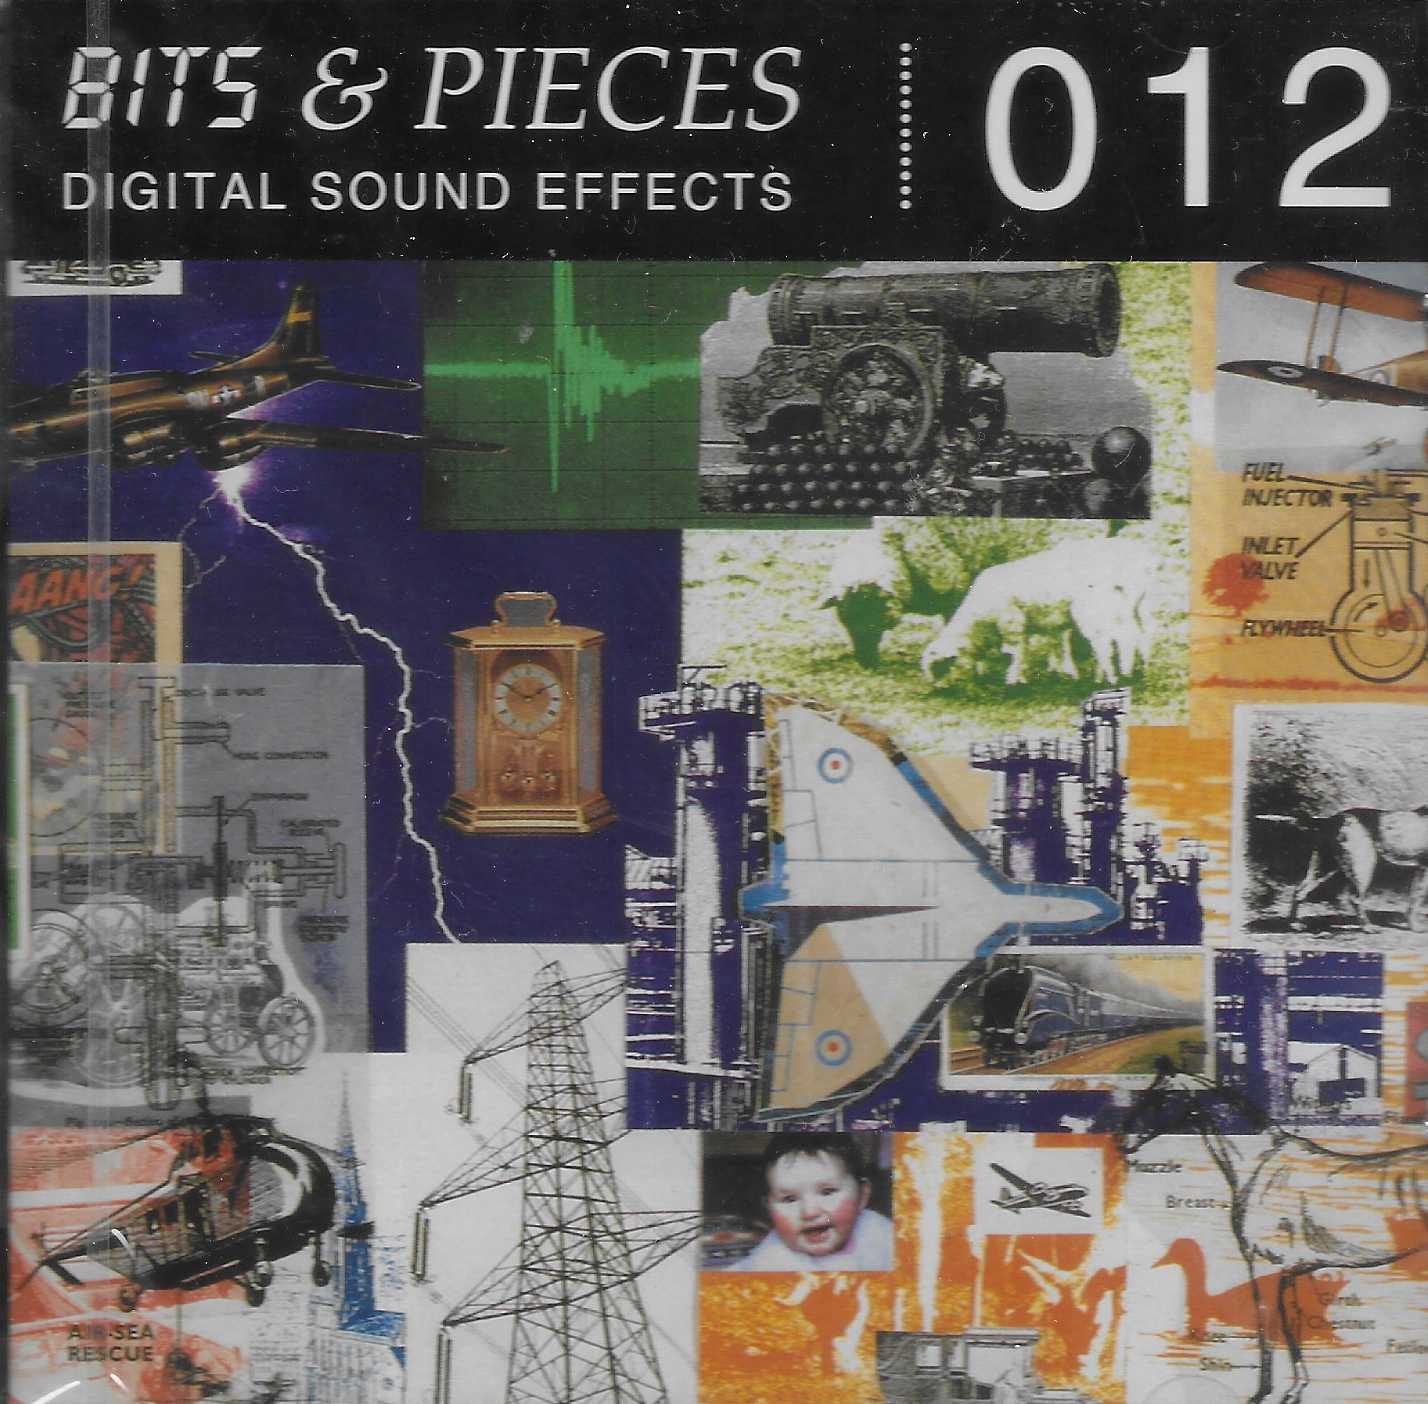 Picture of Bits & pieces digital sound effects 012 by artist Various from ITV, Channel 4 and Channel 5 cds library